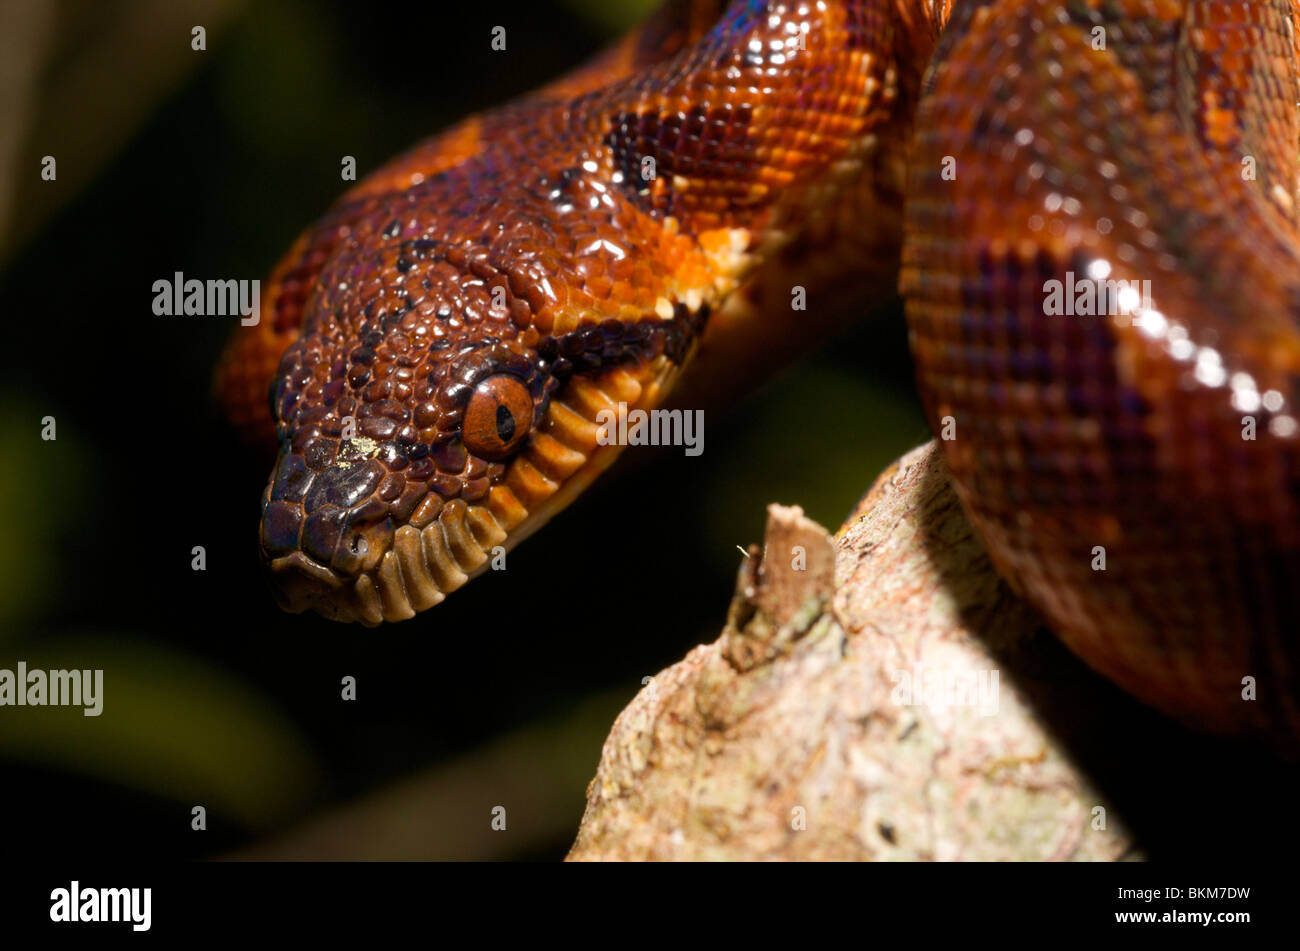 Close-up portrait of young Madagascan boa. Stock Photo